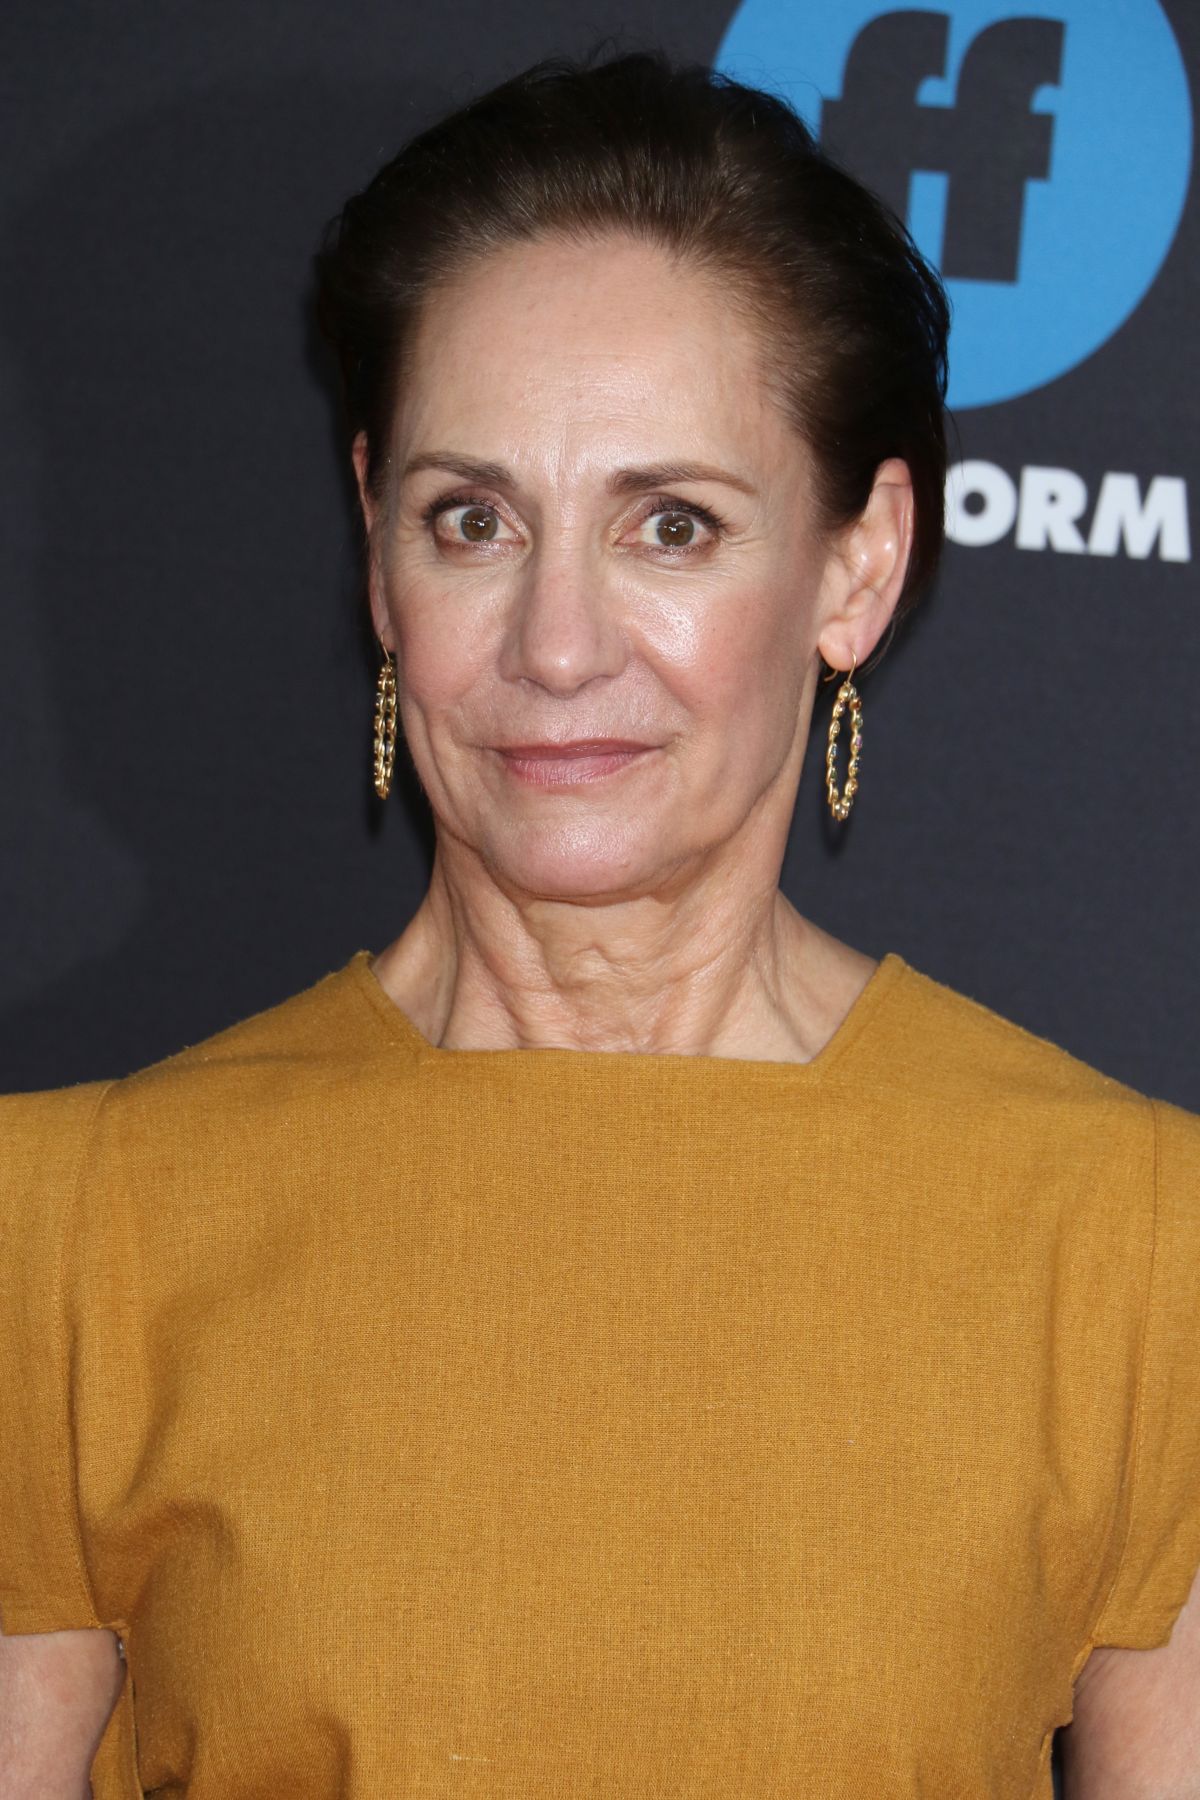 LAURIE METCALF at Disney/ABC/Freeform Upfront in New York 05/15/2018 ...